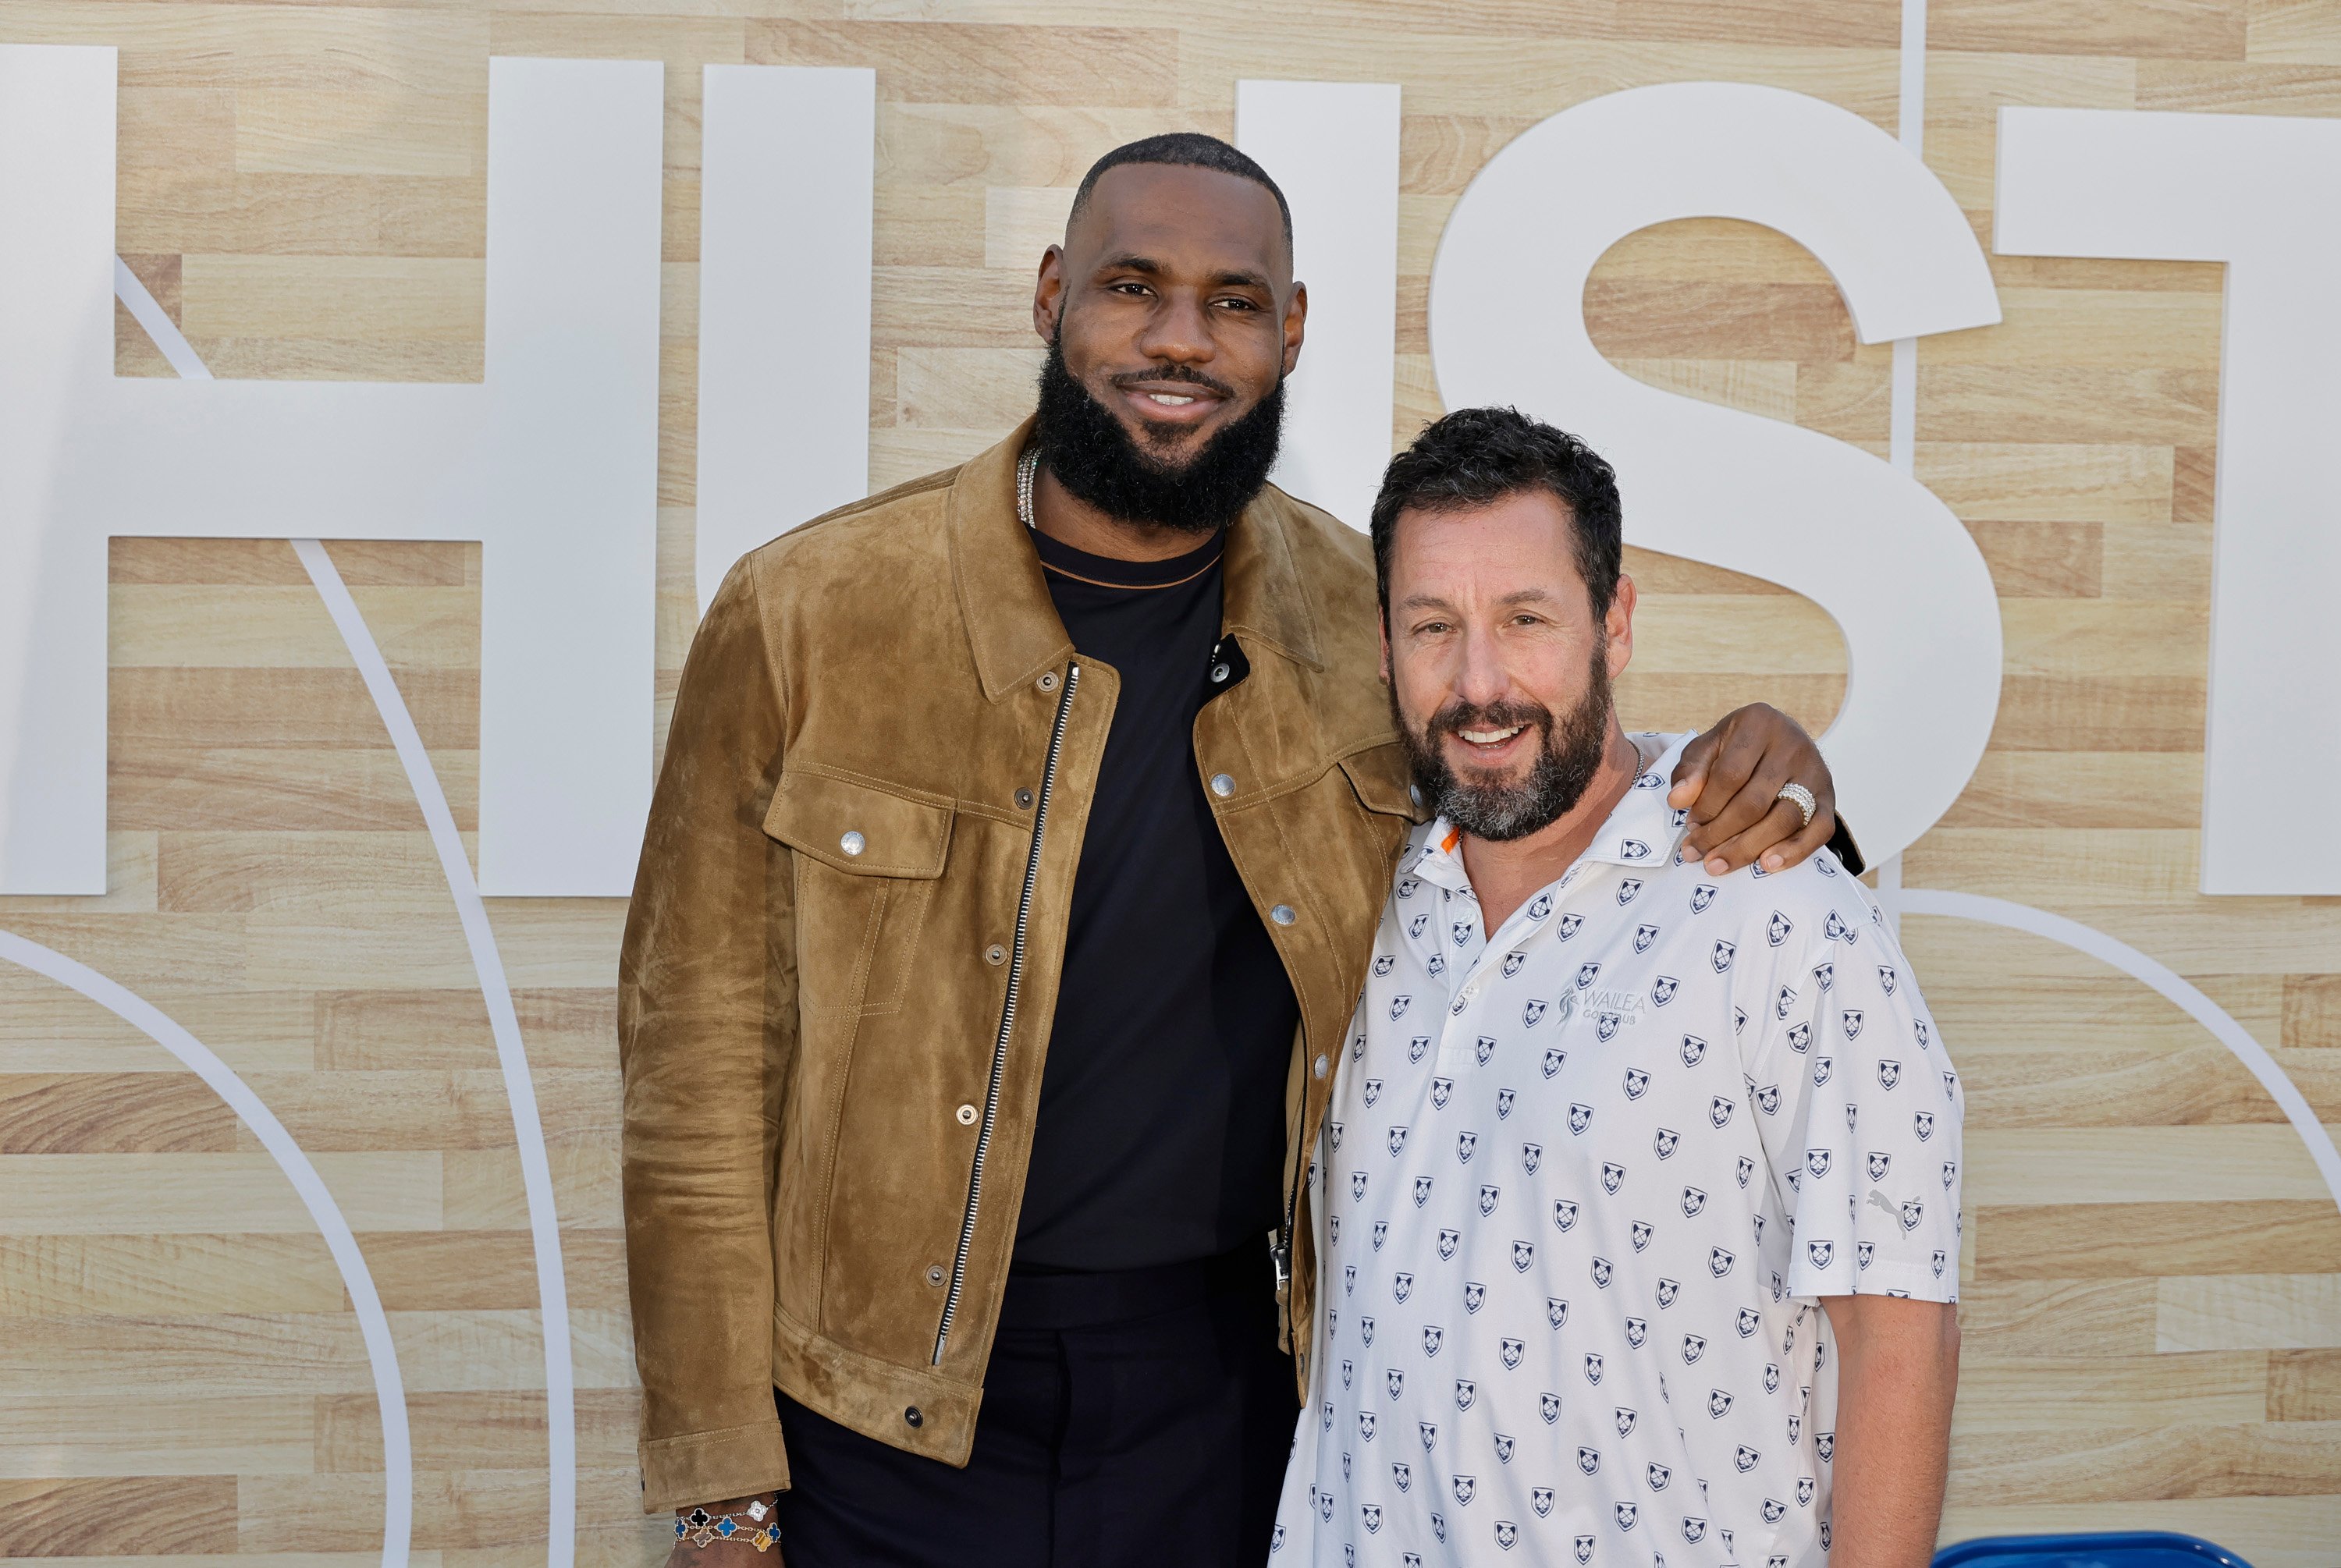 Lebron James and Adam Sandler attend the Los Angeles premiere of the Netflix movie Hustle